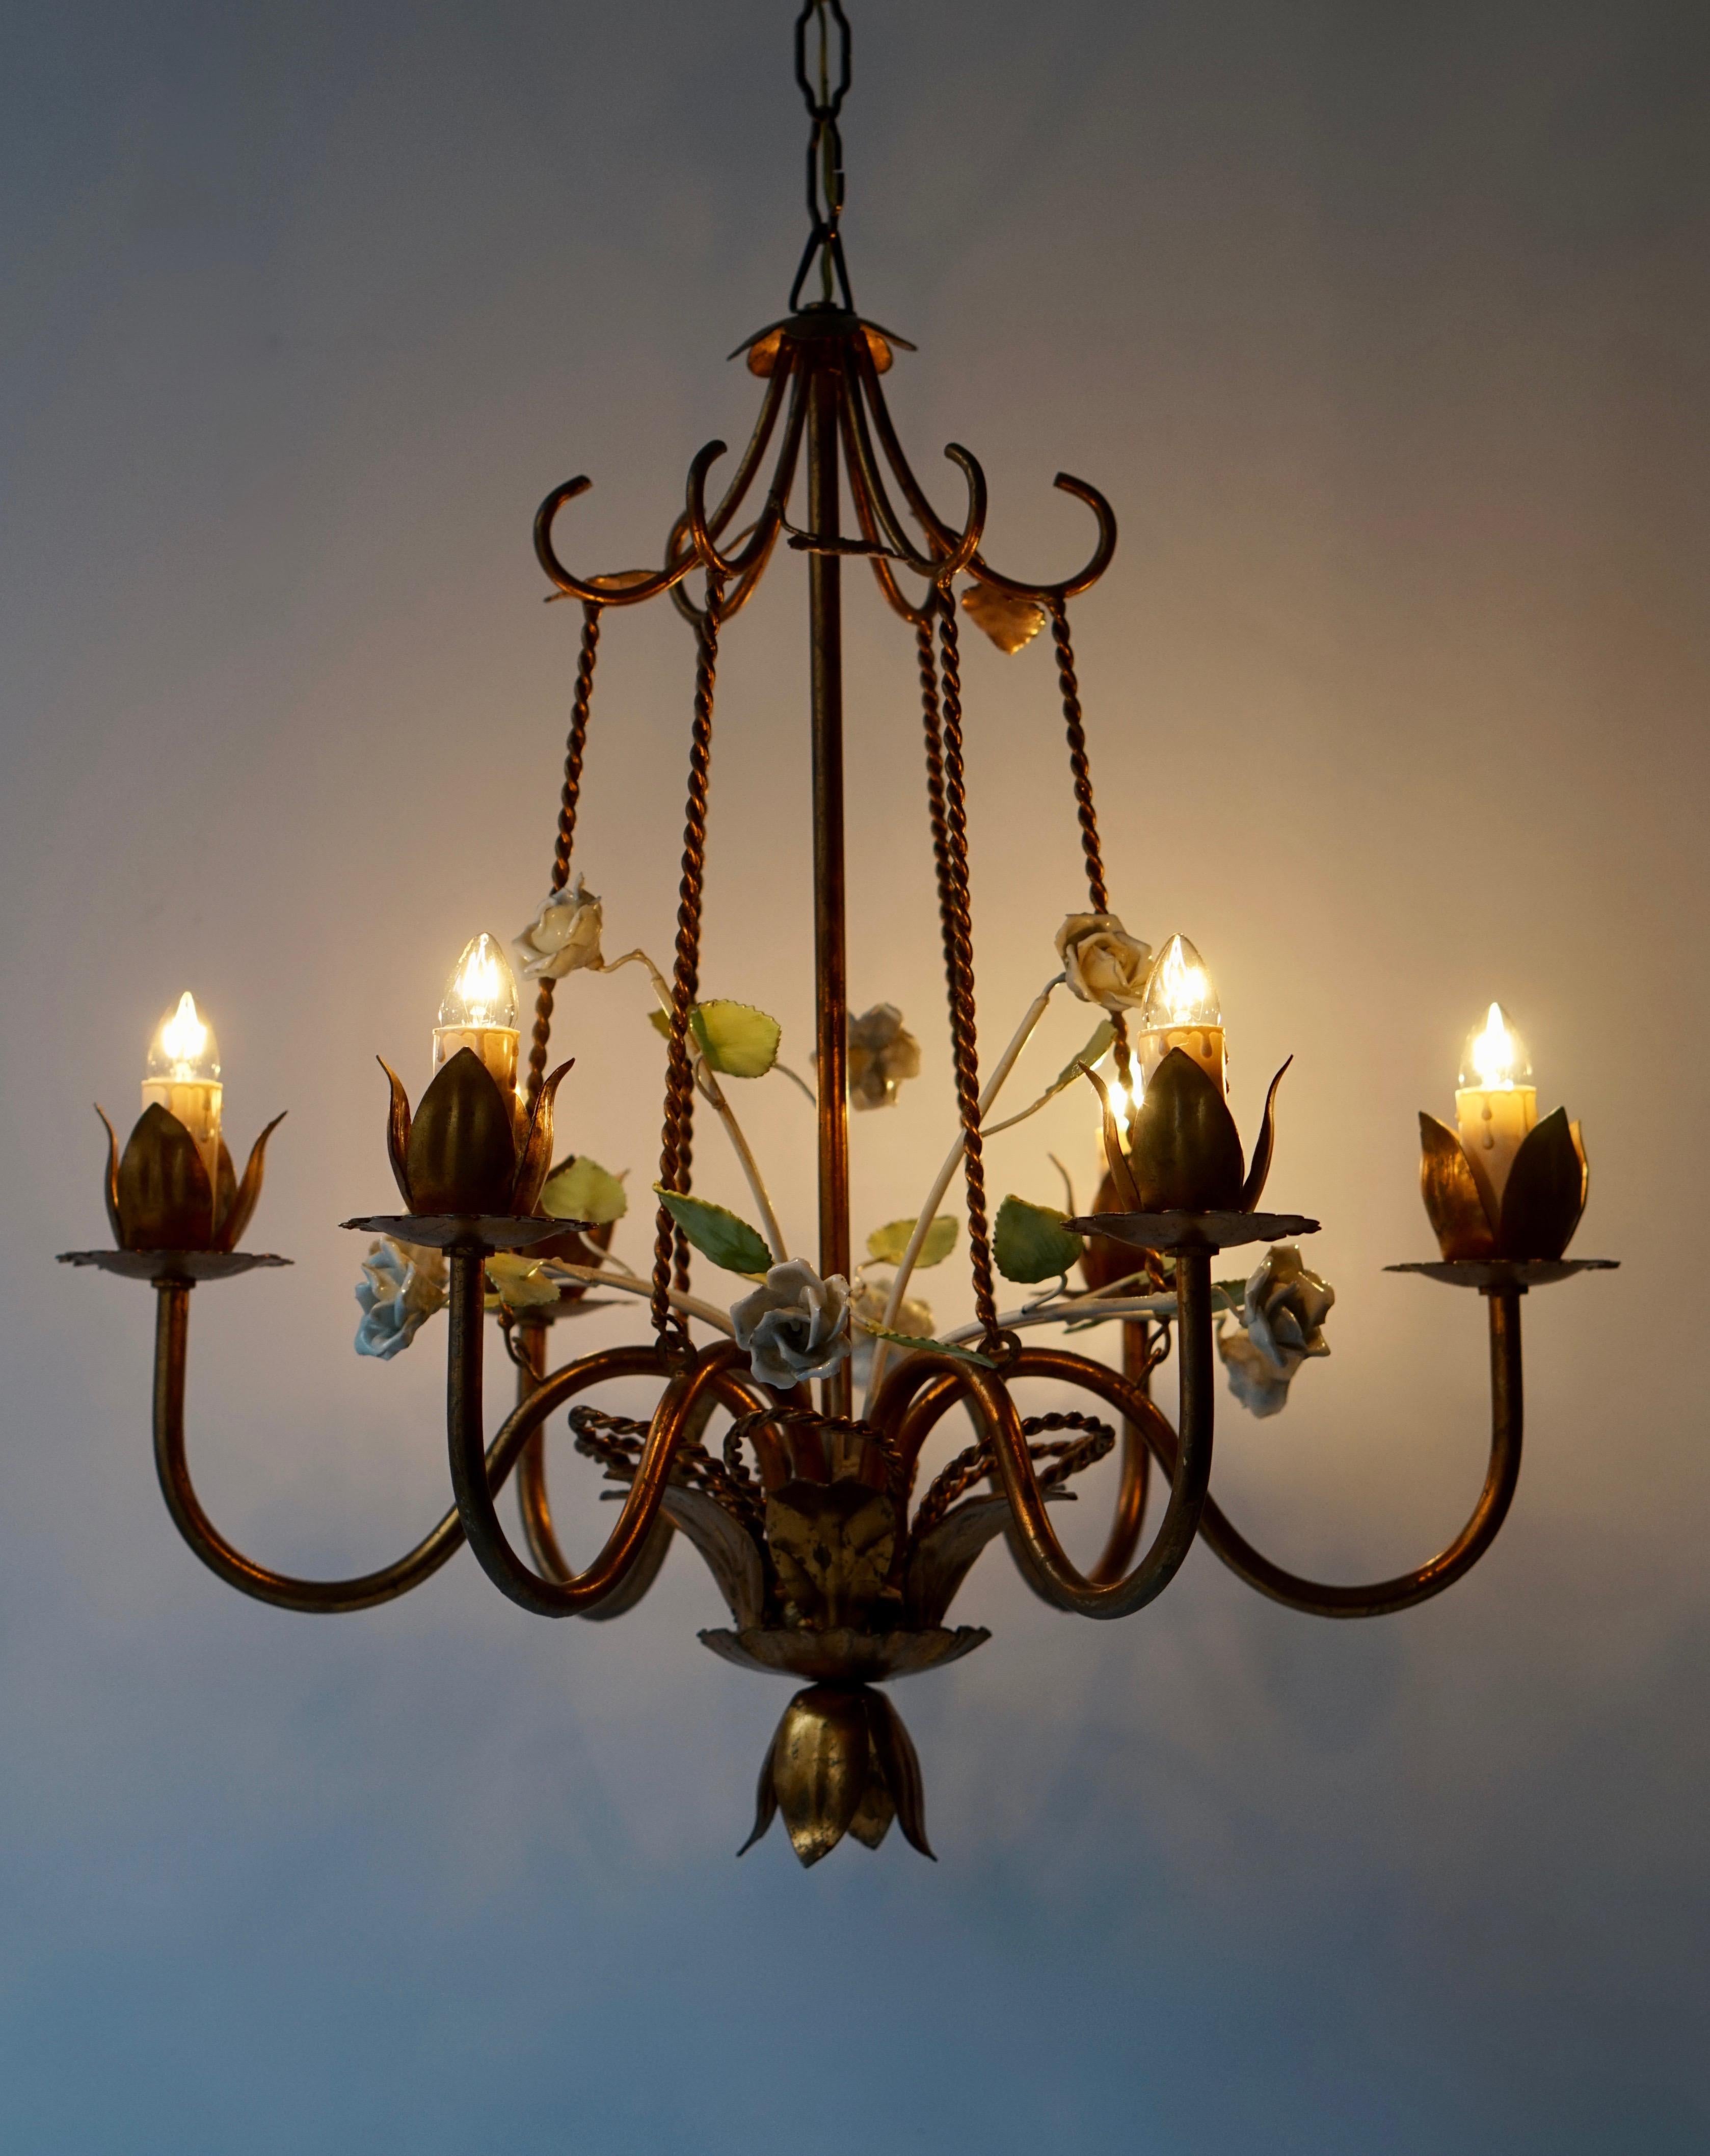 Brass flower chandelier with six E14 lights.
Measures: Total height with the chain is 100 cm.
Diameter 50 cm.
Height fixture 52 cm.

VAT within the EU: 
When buying or delivering an item within the EU, VAT usually applies and will be added.